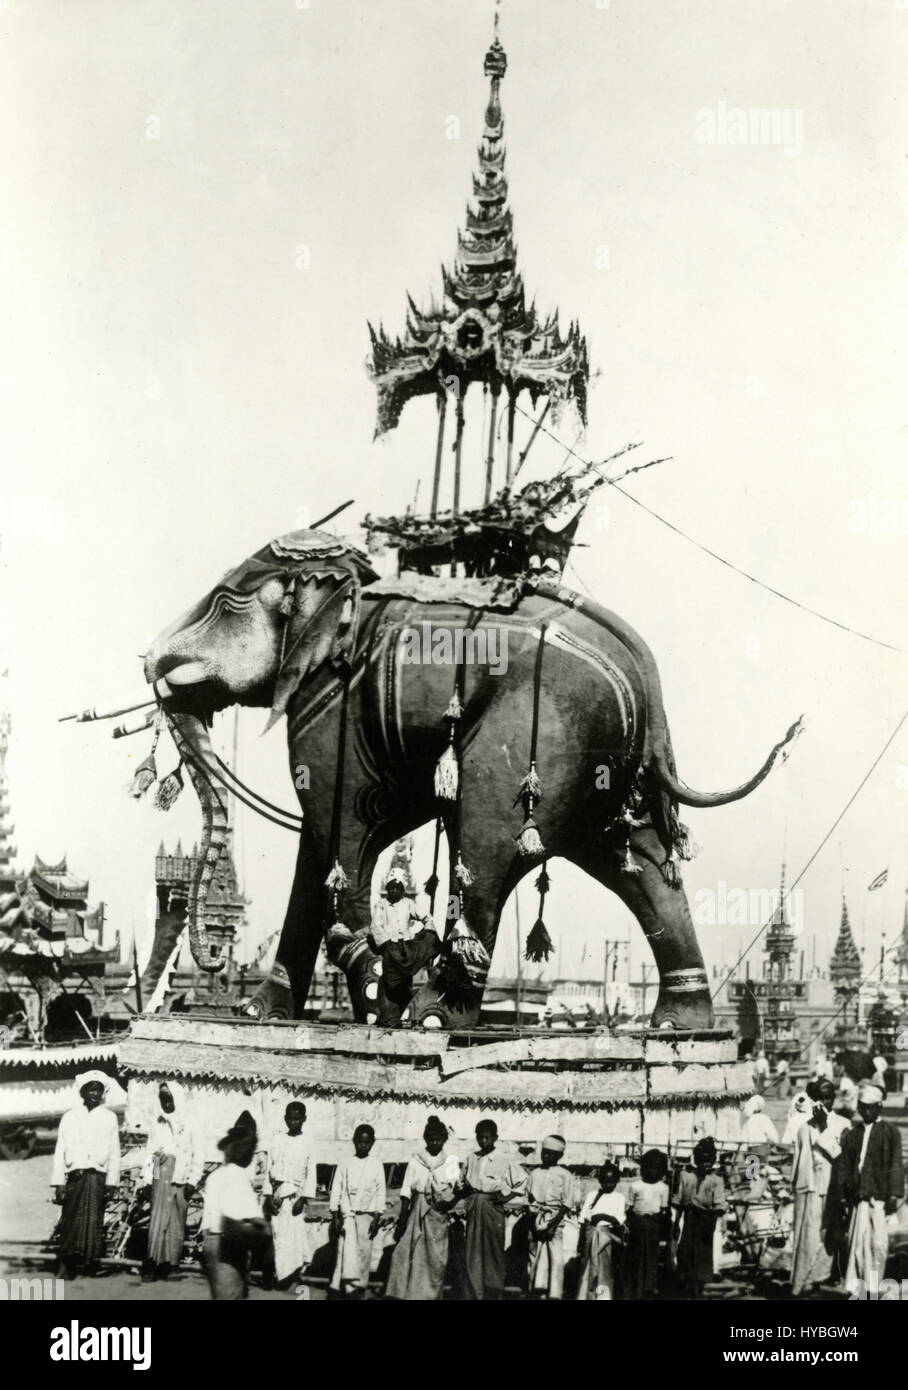 Funeral of a rich person in an elephant-shaped sarcophagus, Mandalay, Myanmar Stock Photo